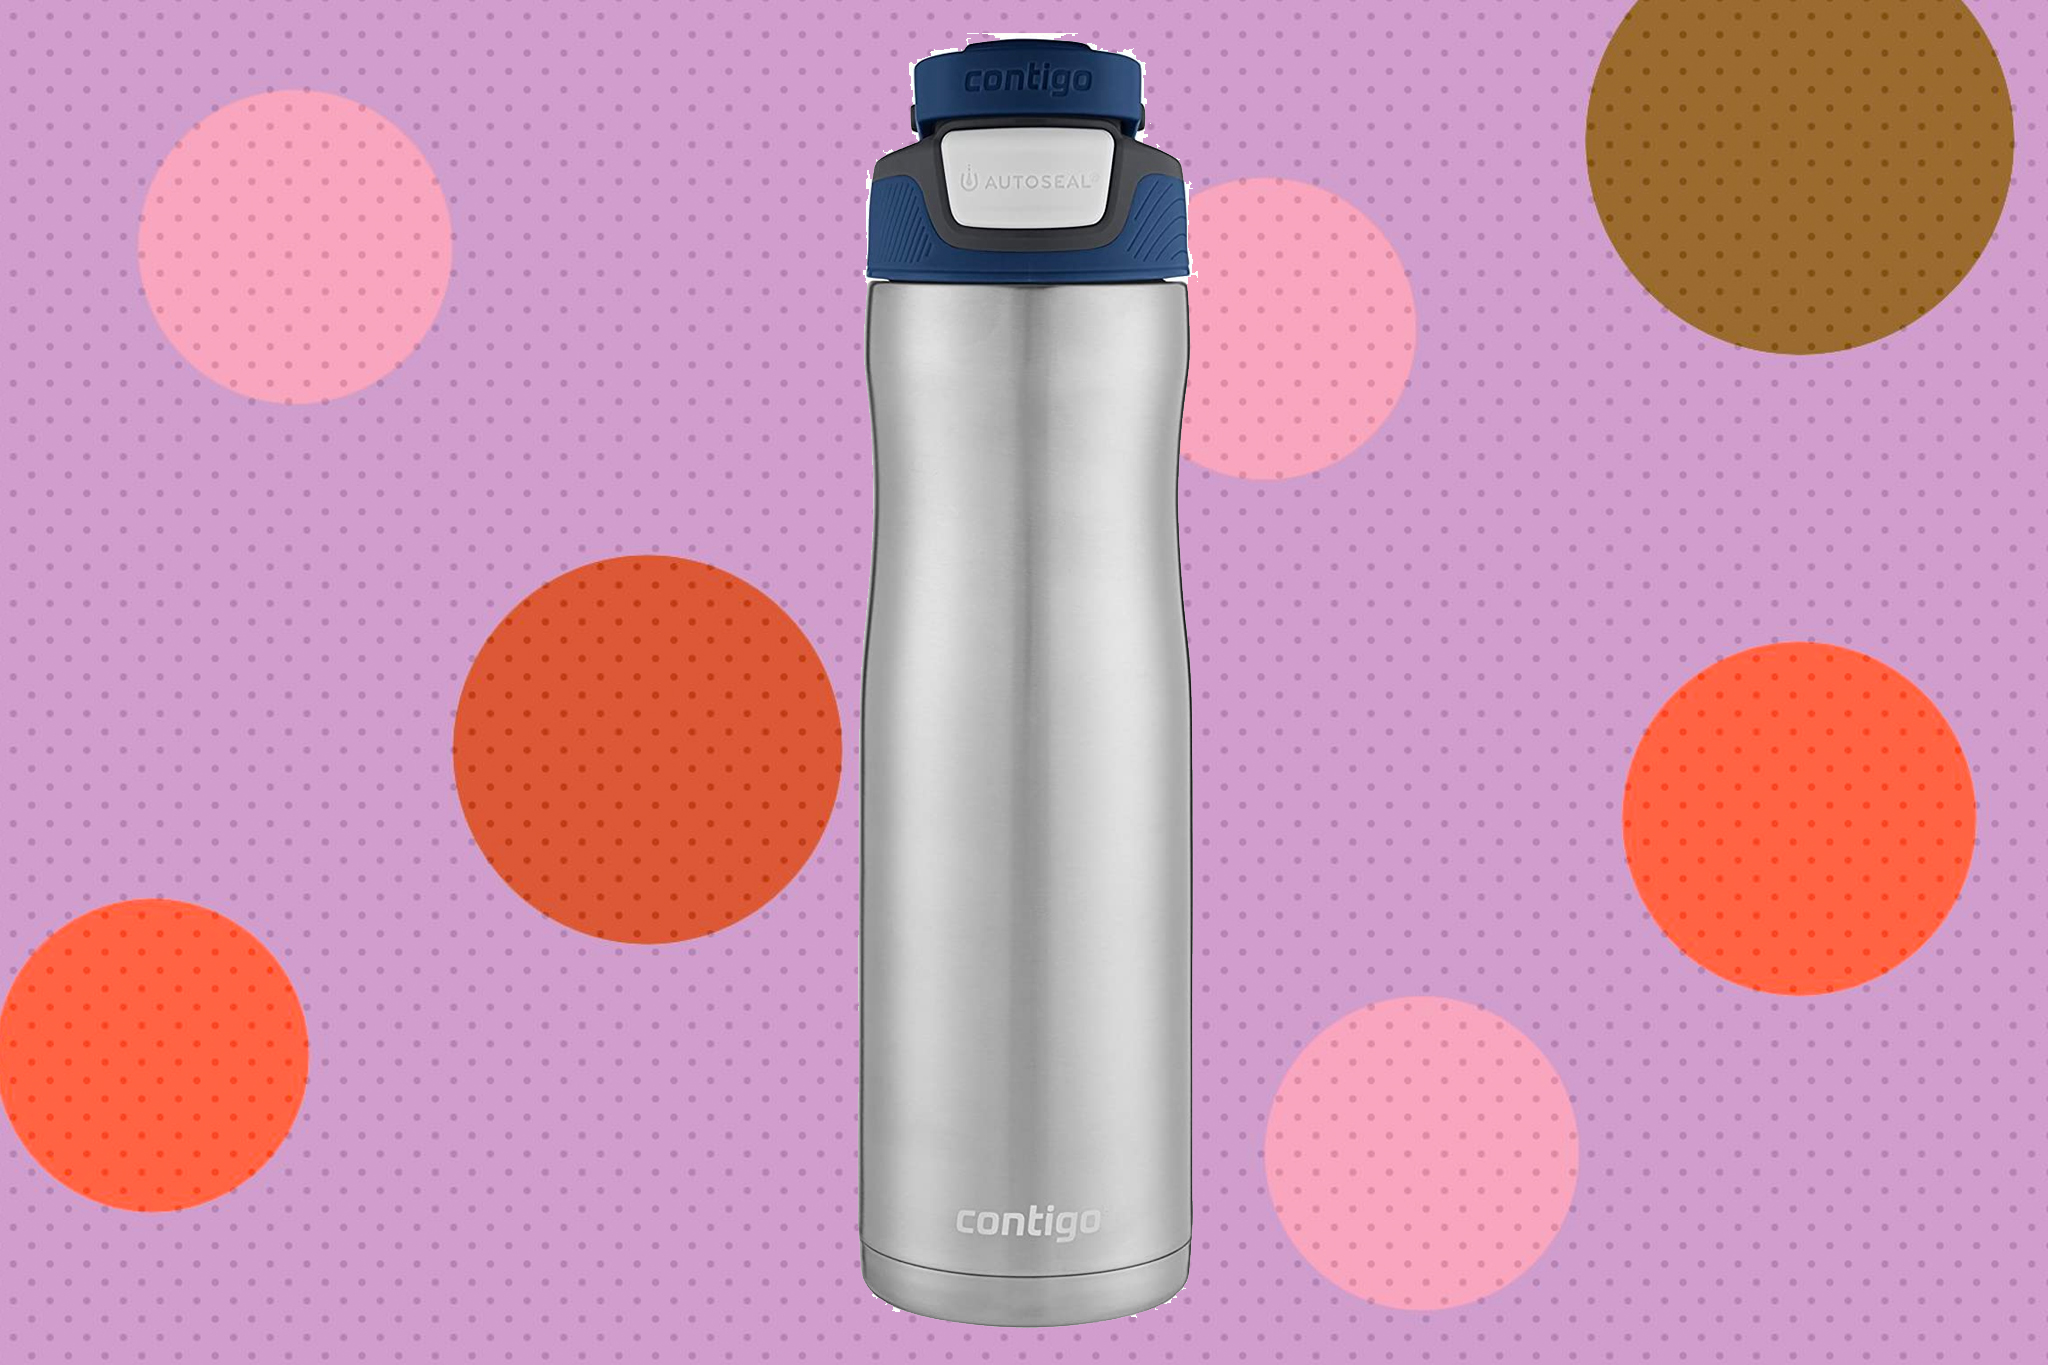 Contigo 24 Oz. Auto seal Chill Stainless Steel Water Bottle, Iced